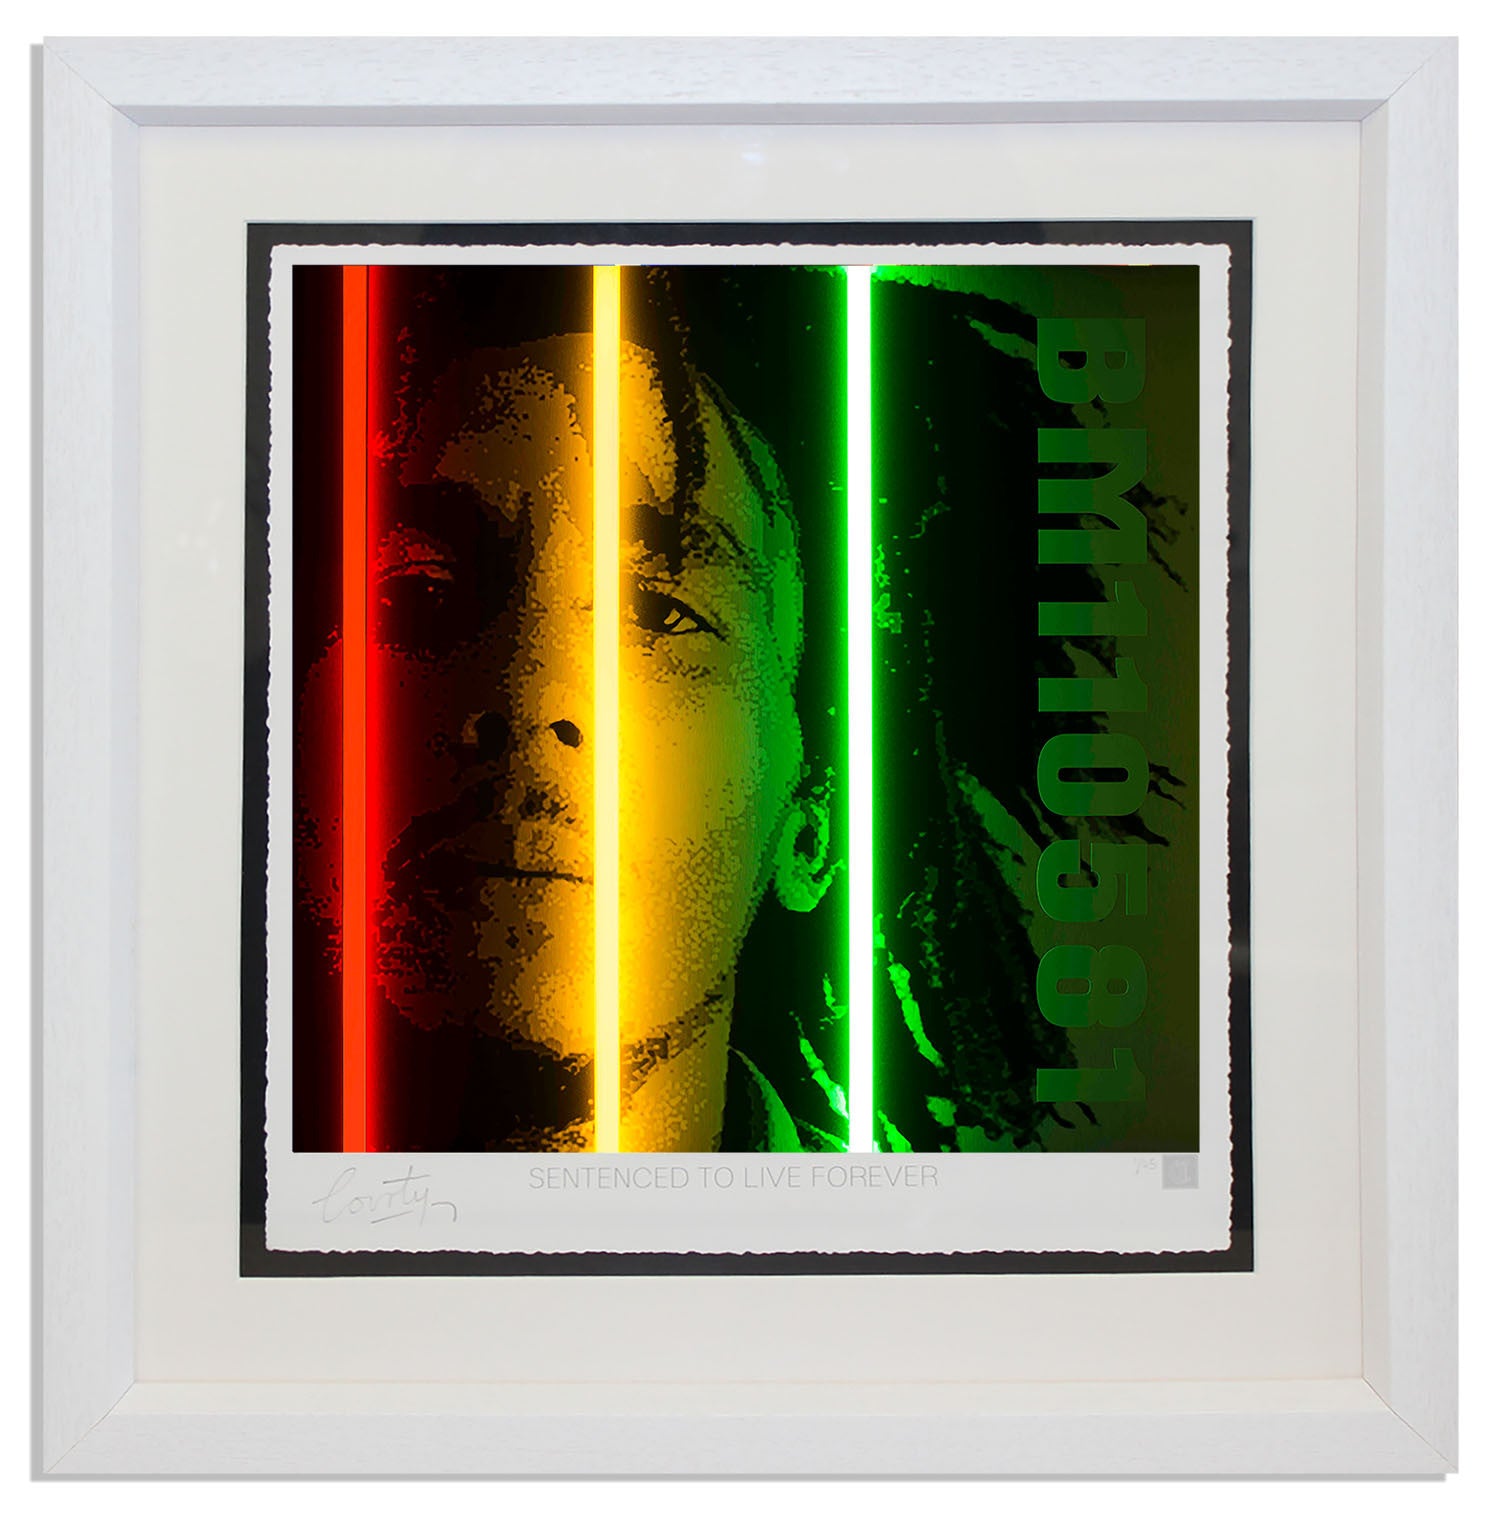 "Bob Marley" by Courty (FRAMED limited edition screen print)